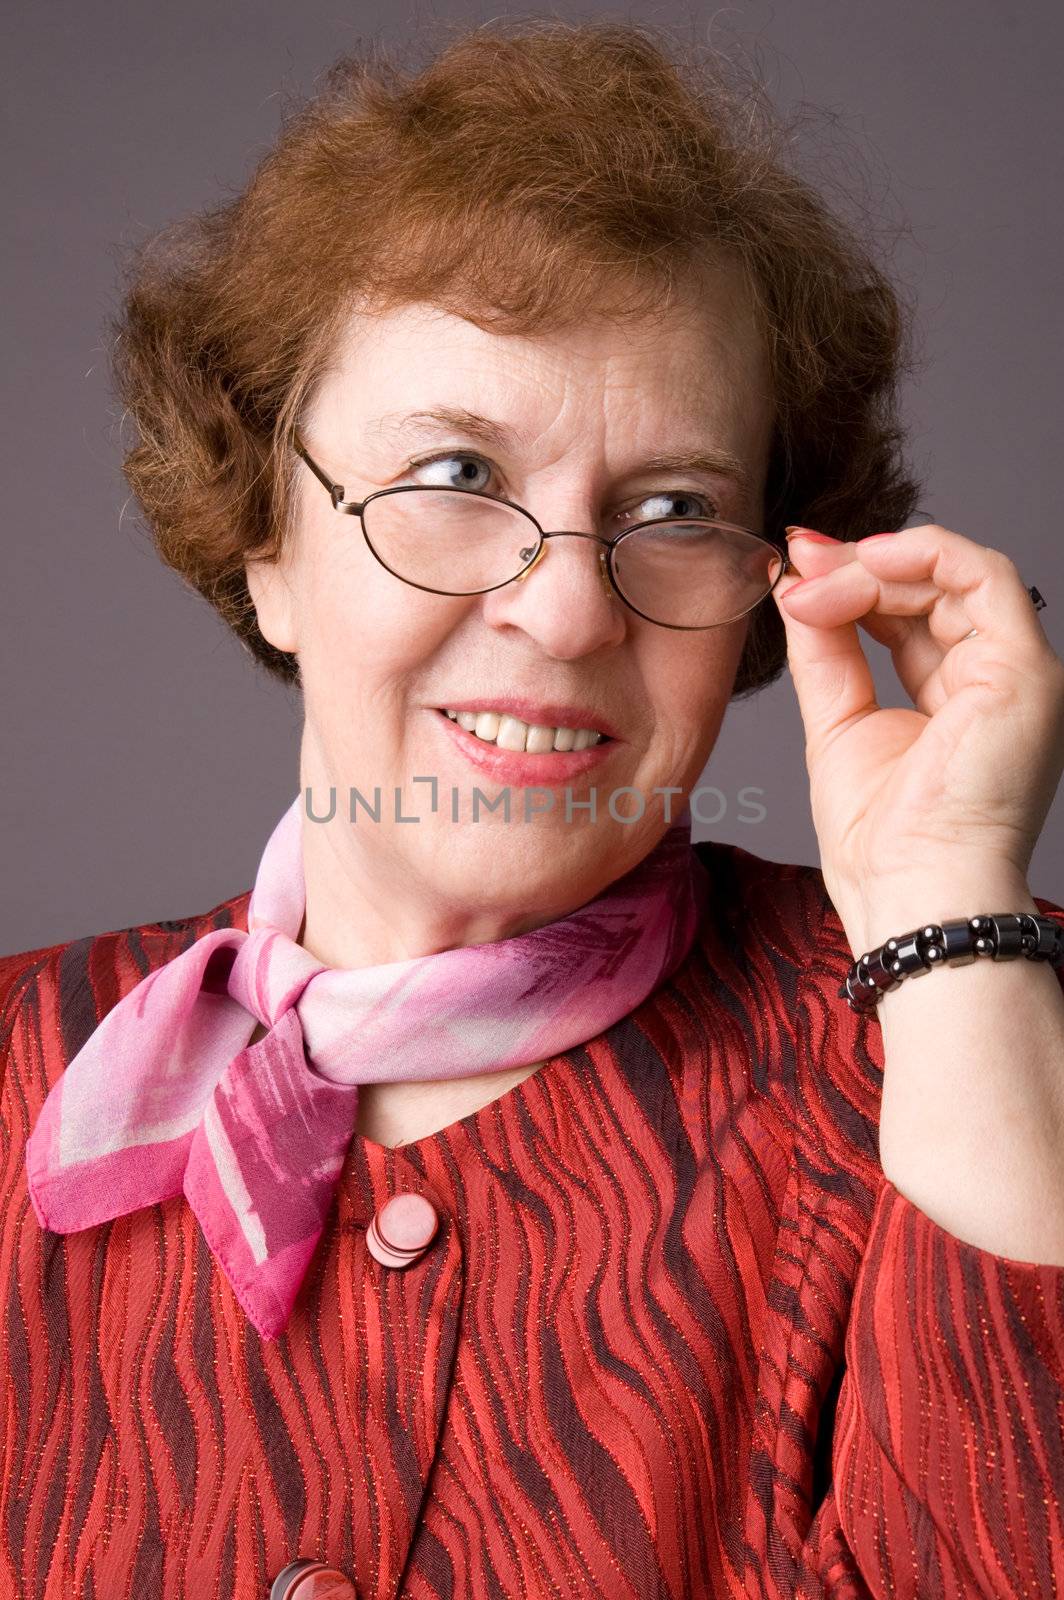 The pleasant elderly woman on gray background.